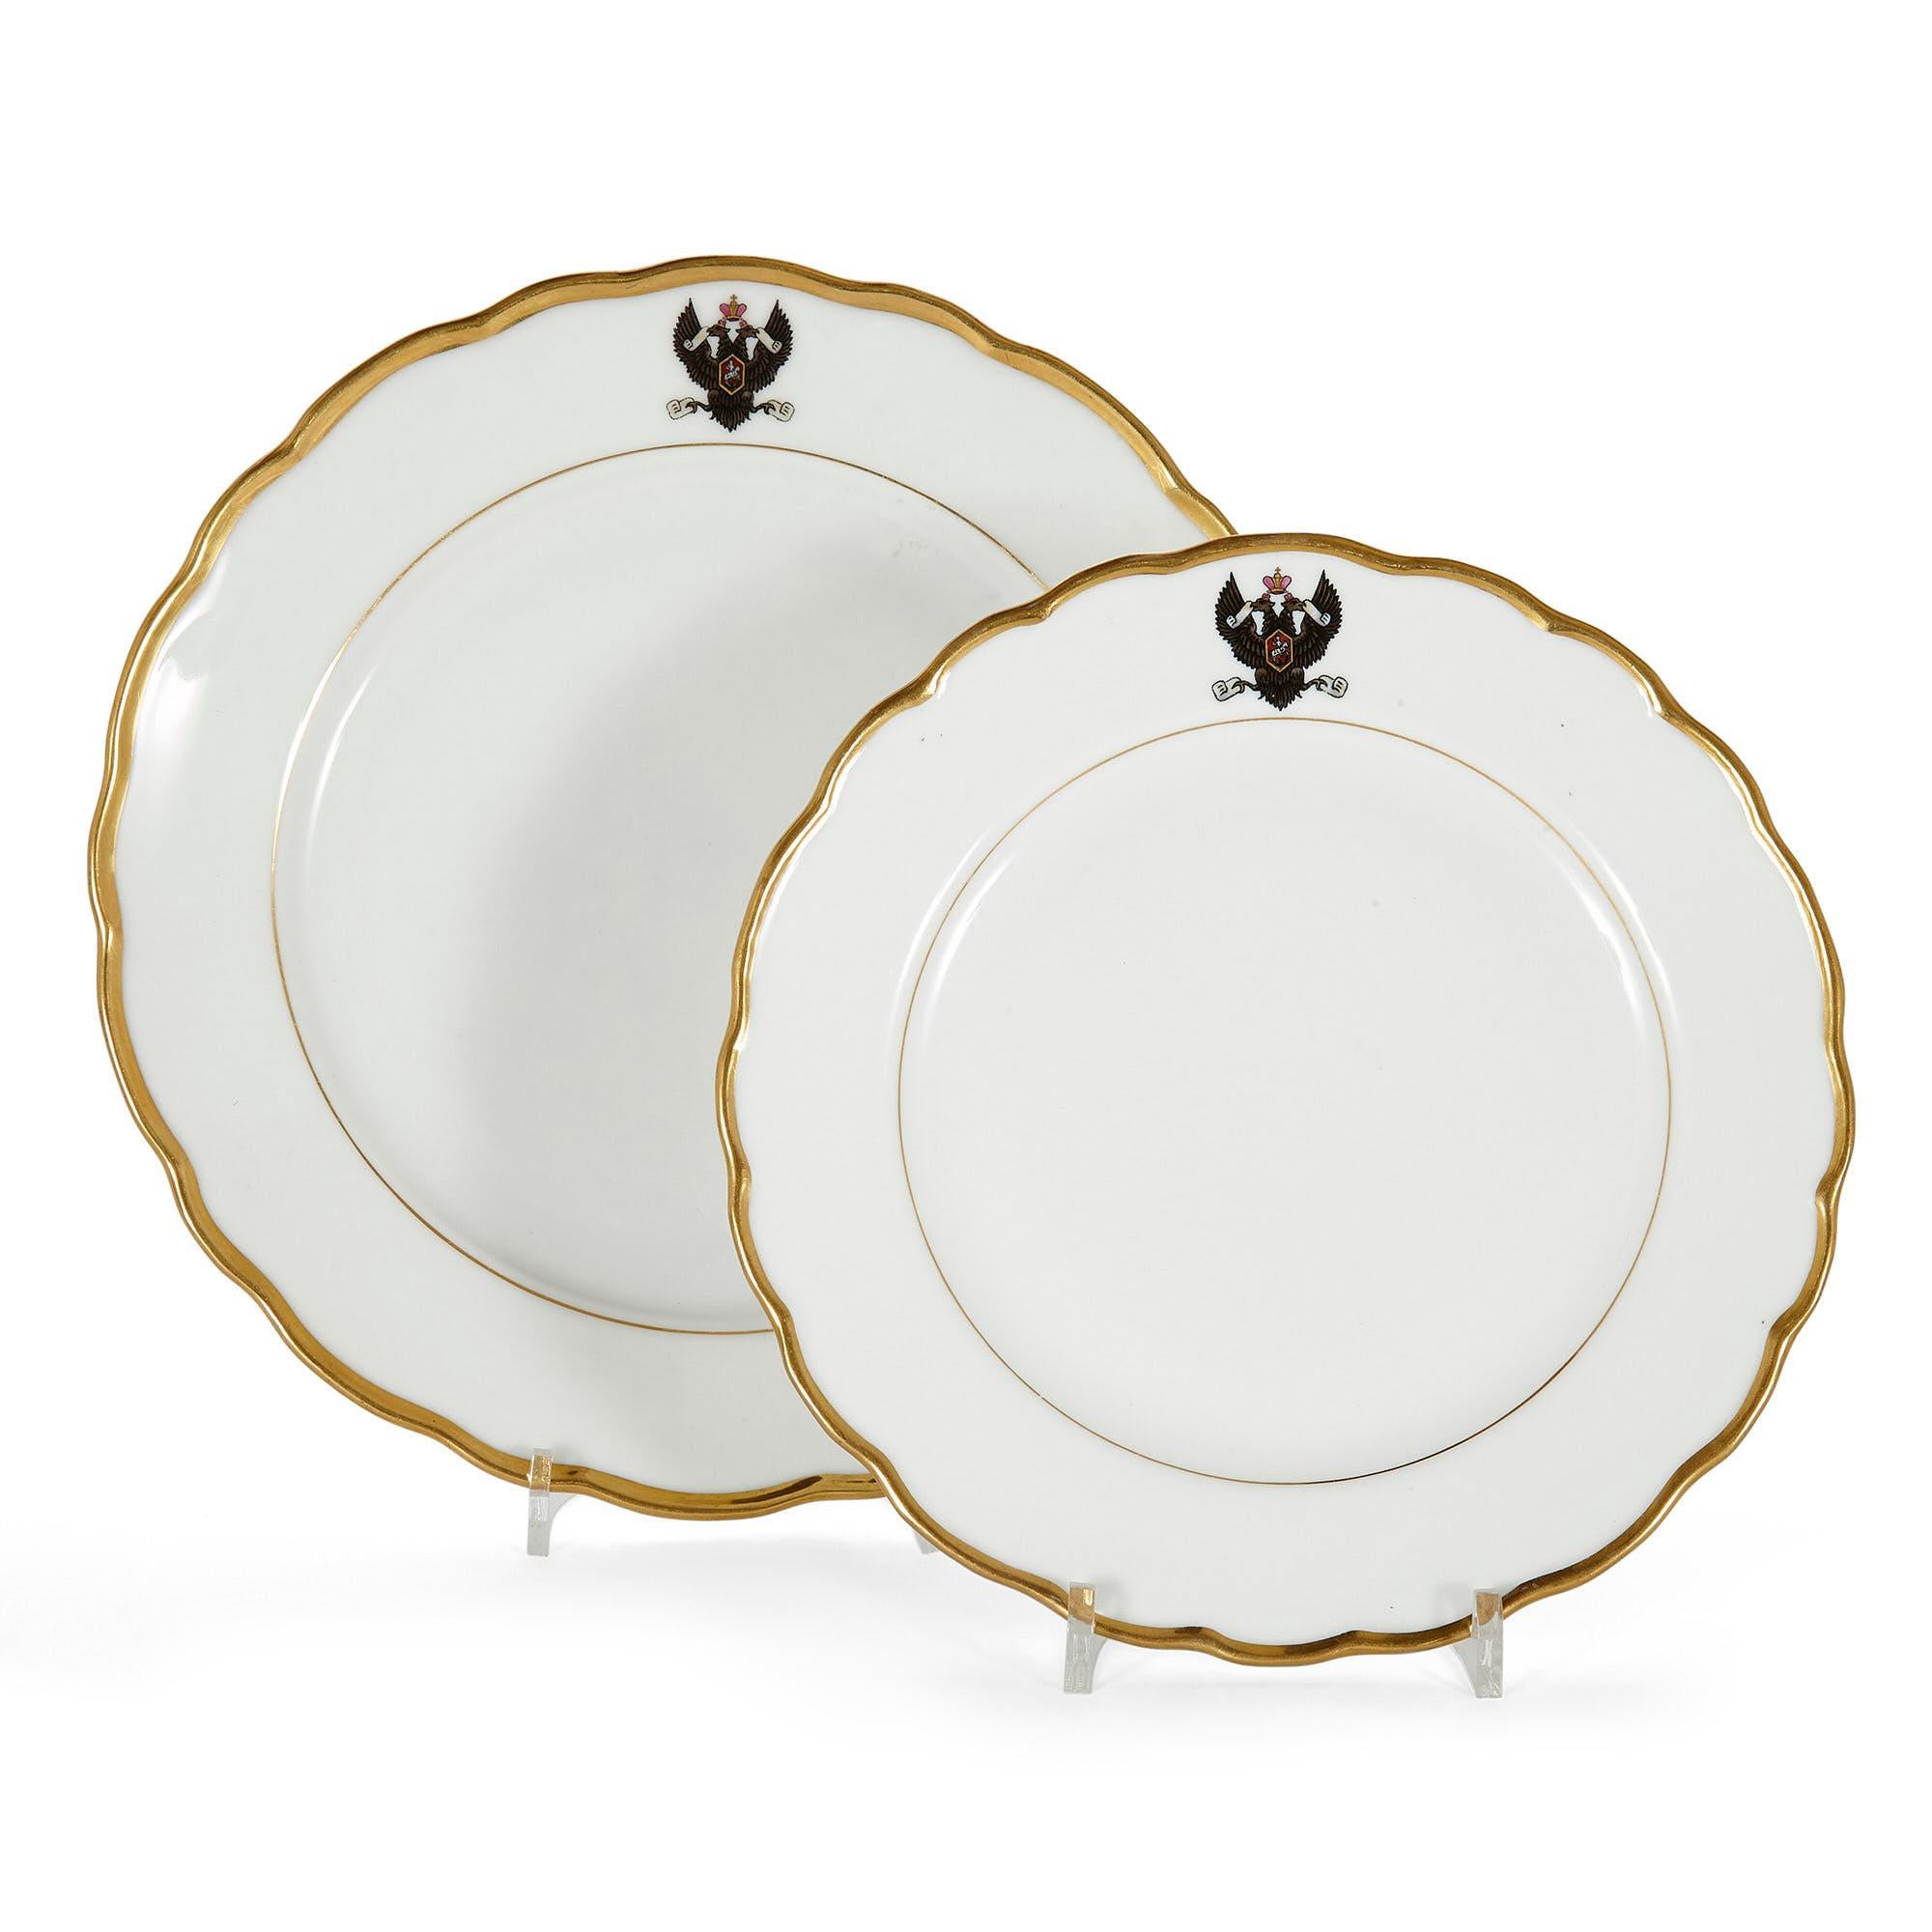 Set of antique Kornilov Porcelain Imperial Russian Navy plates
Russian, late 19th century
Large plates: Height 2.5cm, diameter 24.5cm
Small plates: Height 2cm, diameter 21cm

Consisting of eight plates - four large and four small - this